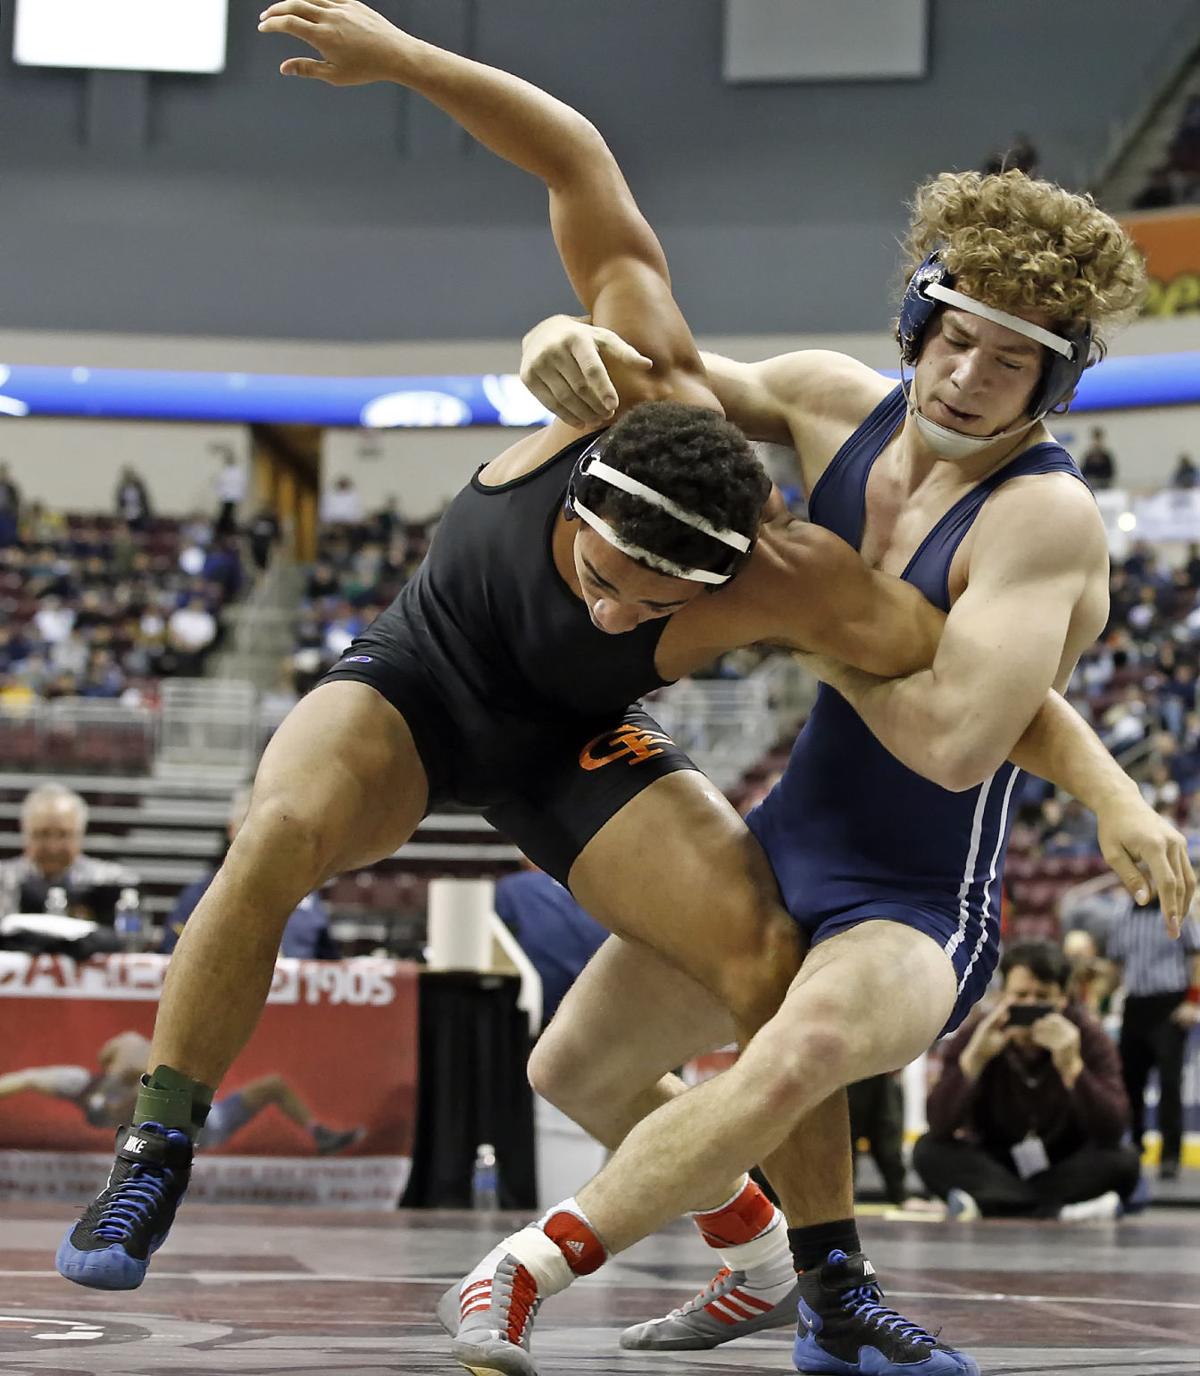 Taking a last look at the PIAA State wrestling tournament Wrestling